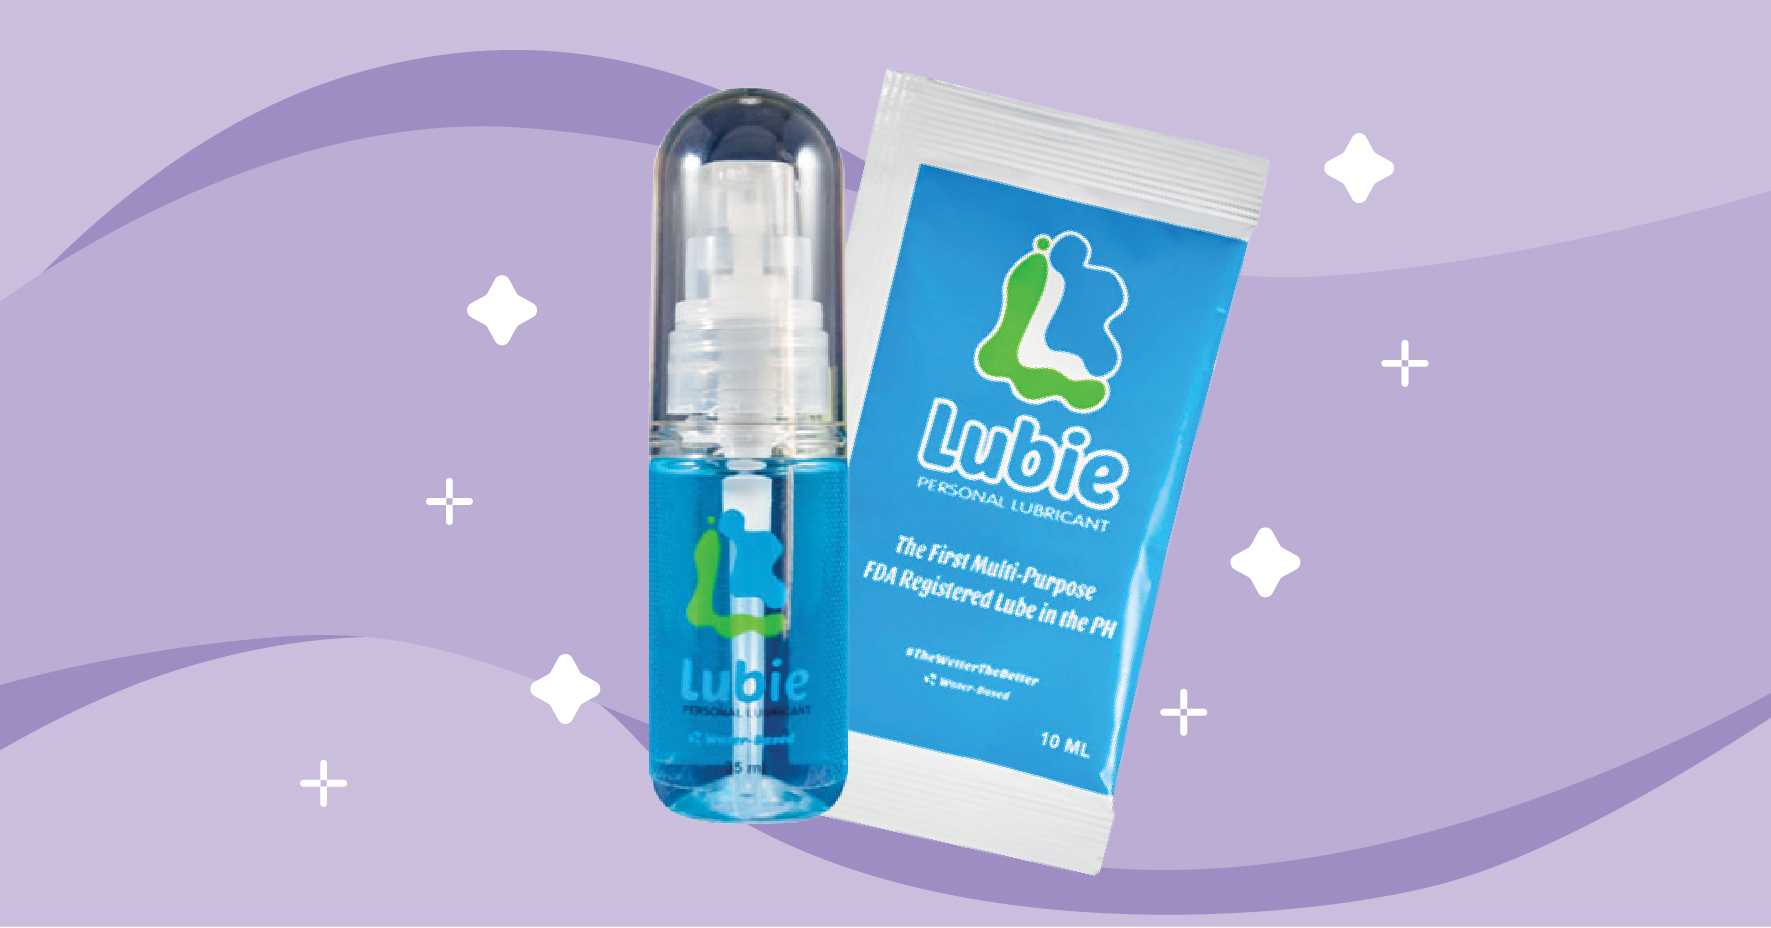 Meet Lubie: The First FDA-Registered Multi-Purpose Lube in the PH